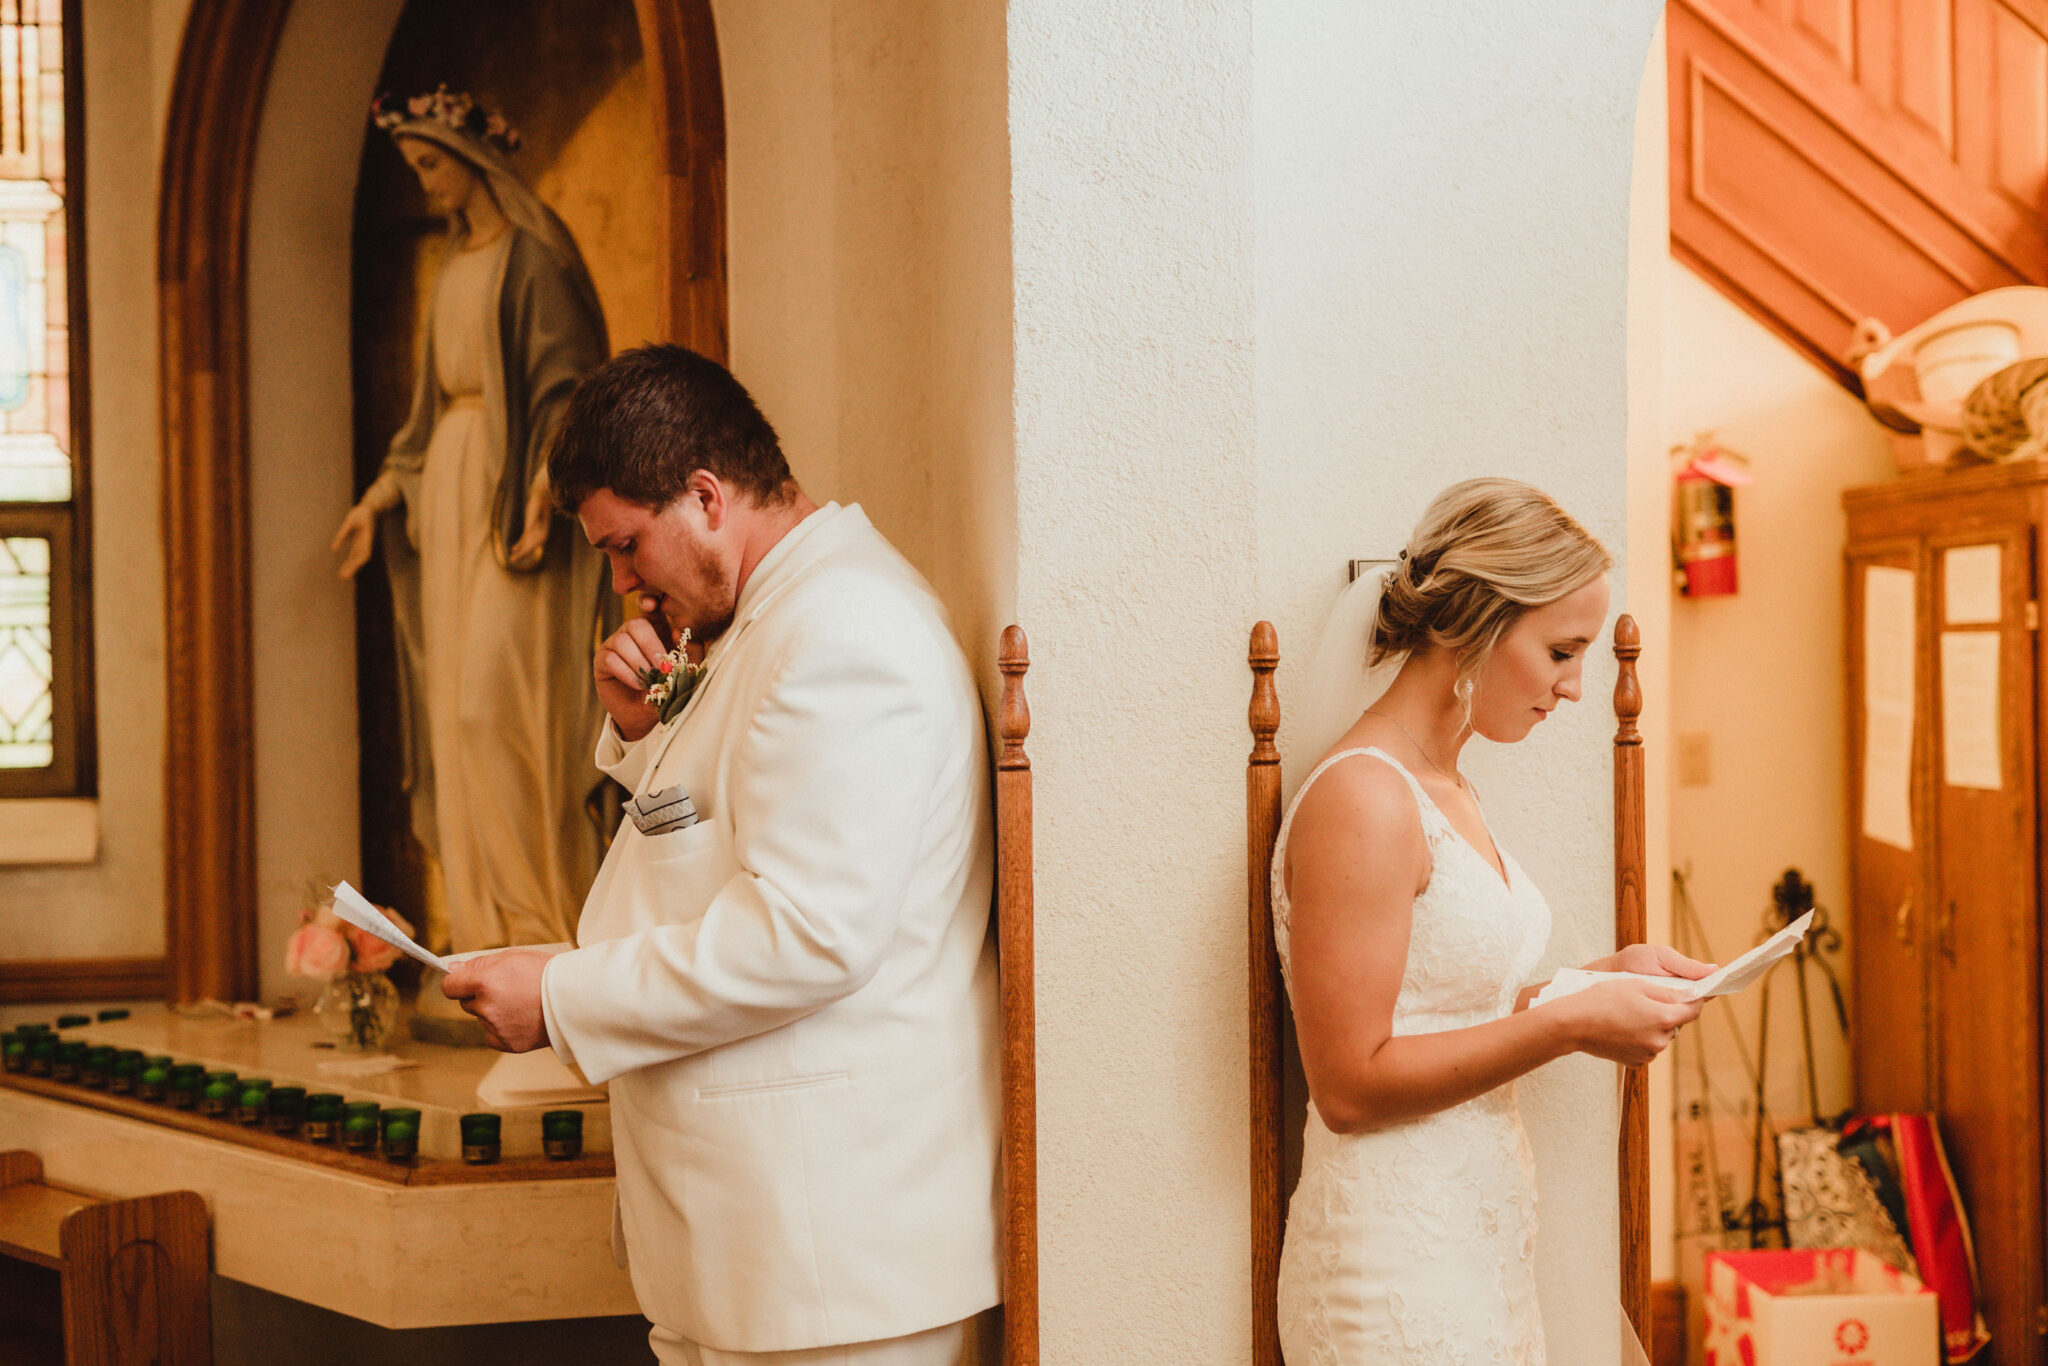 A bride and groom read letters from each other before their rustic wedding ceremony. Wisconsin wedding photography Bride and groom letters First look photos #weddingplanning #weddingtimeline #diywedding #wisconsinweddingphotographer #wisconsinchurchwedding